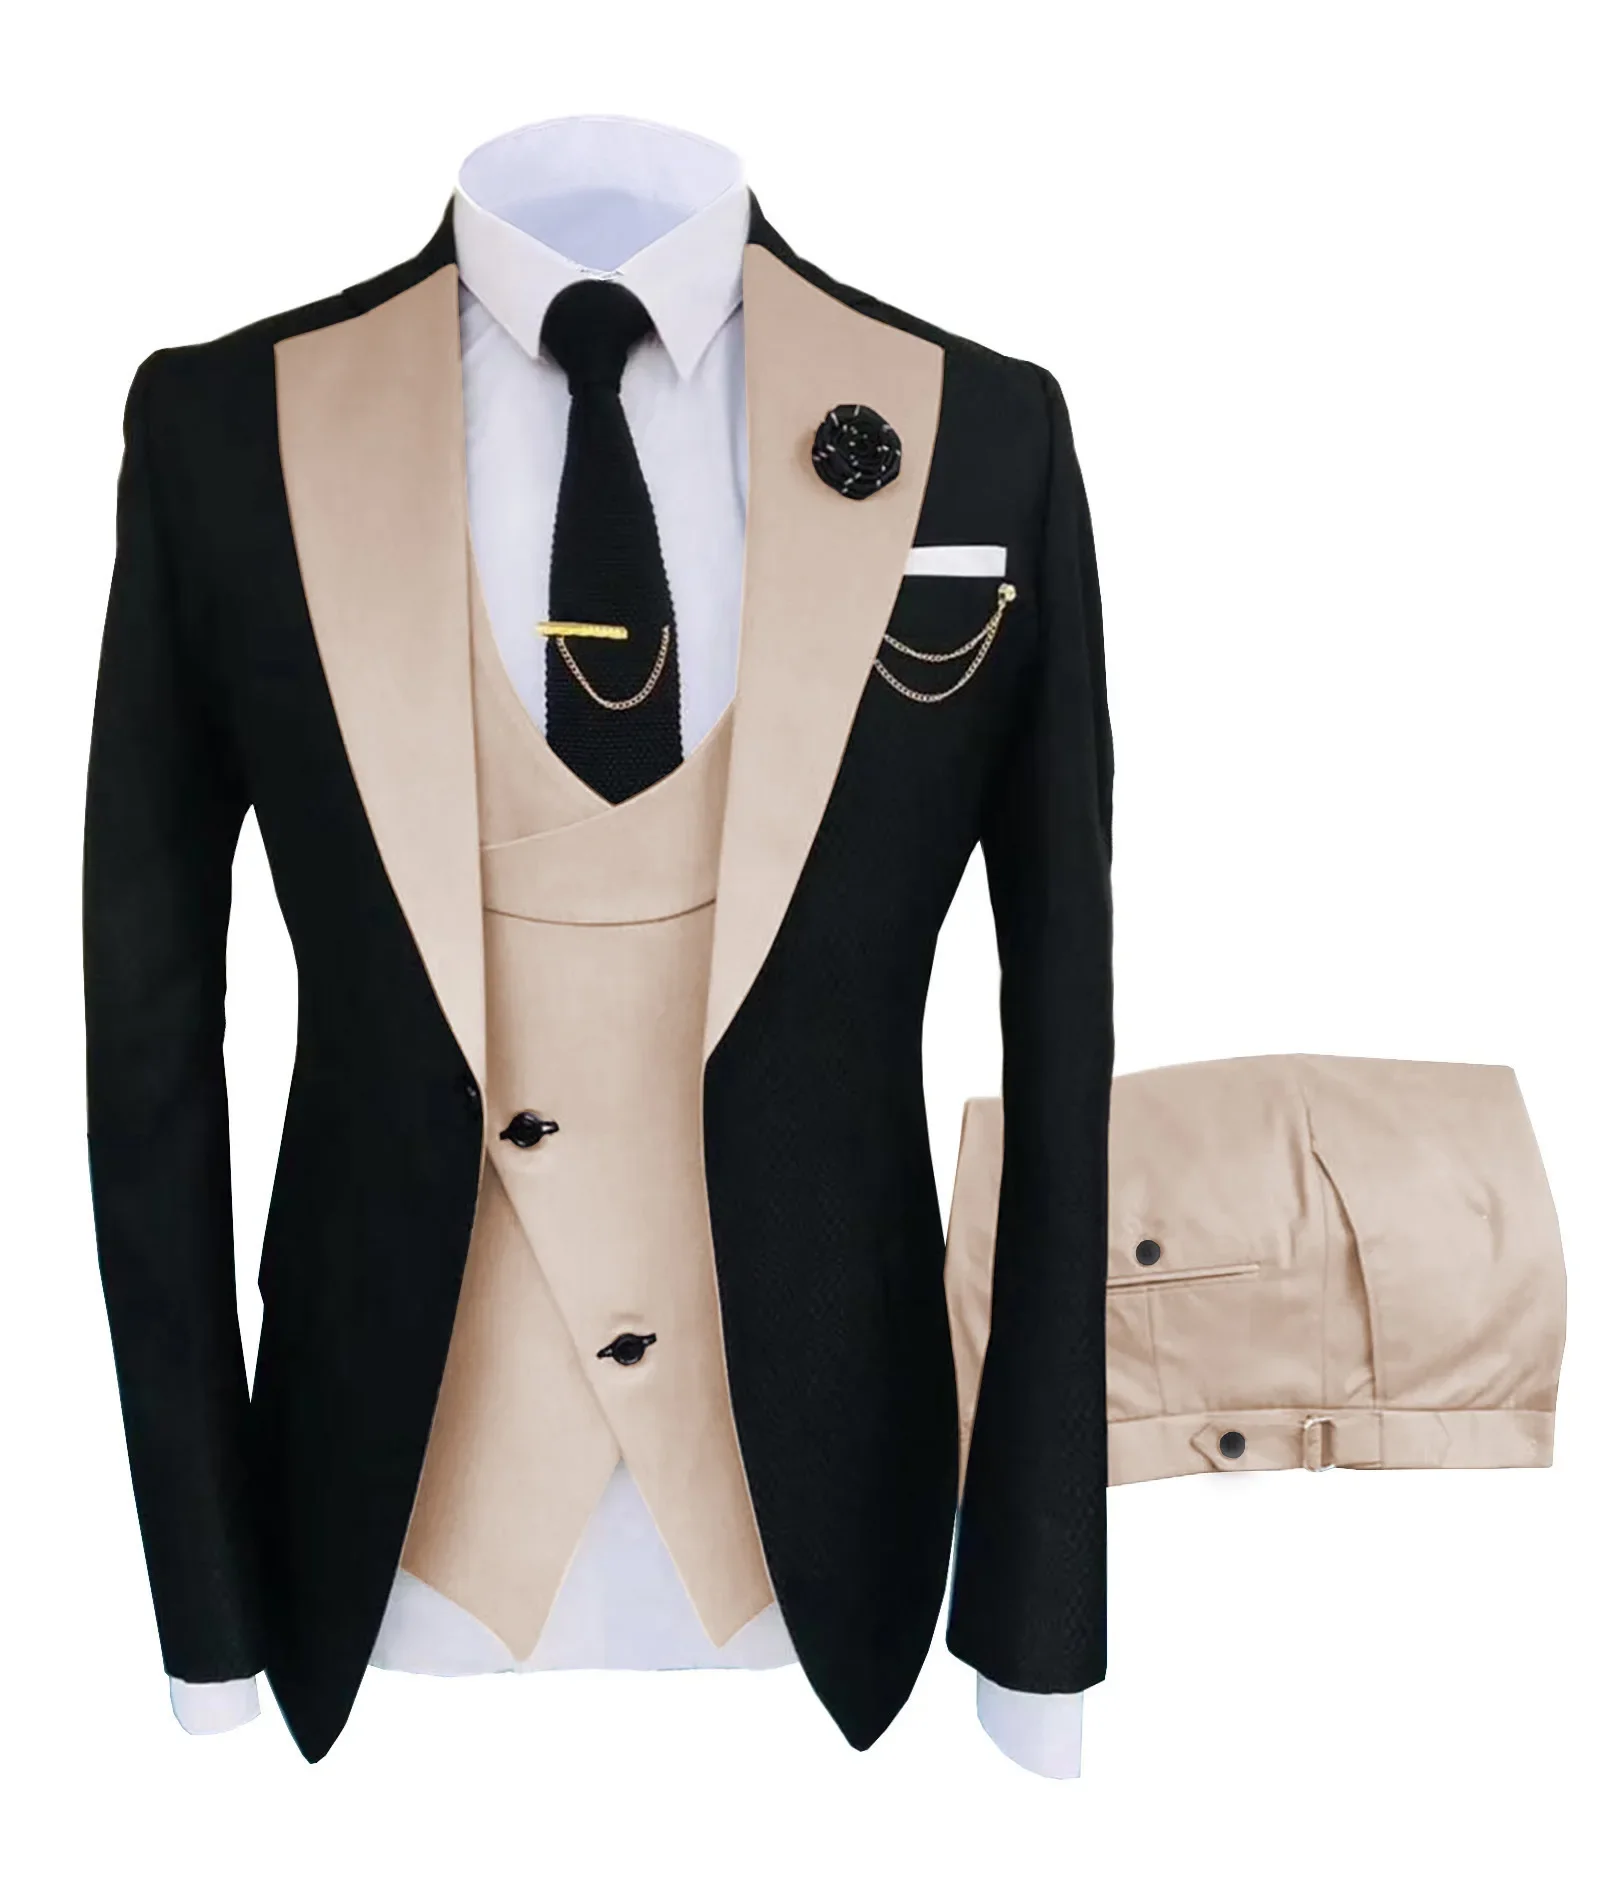 How to Choose a Wedding Suit Based on Personal Style